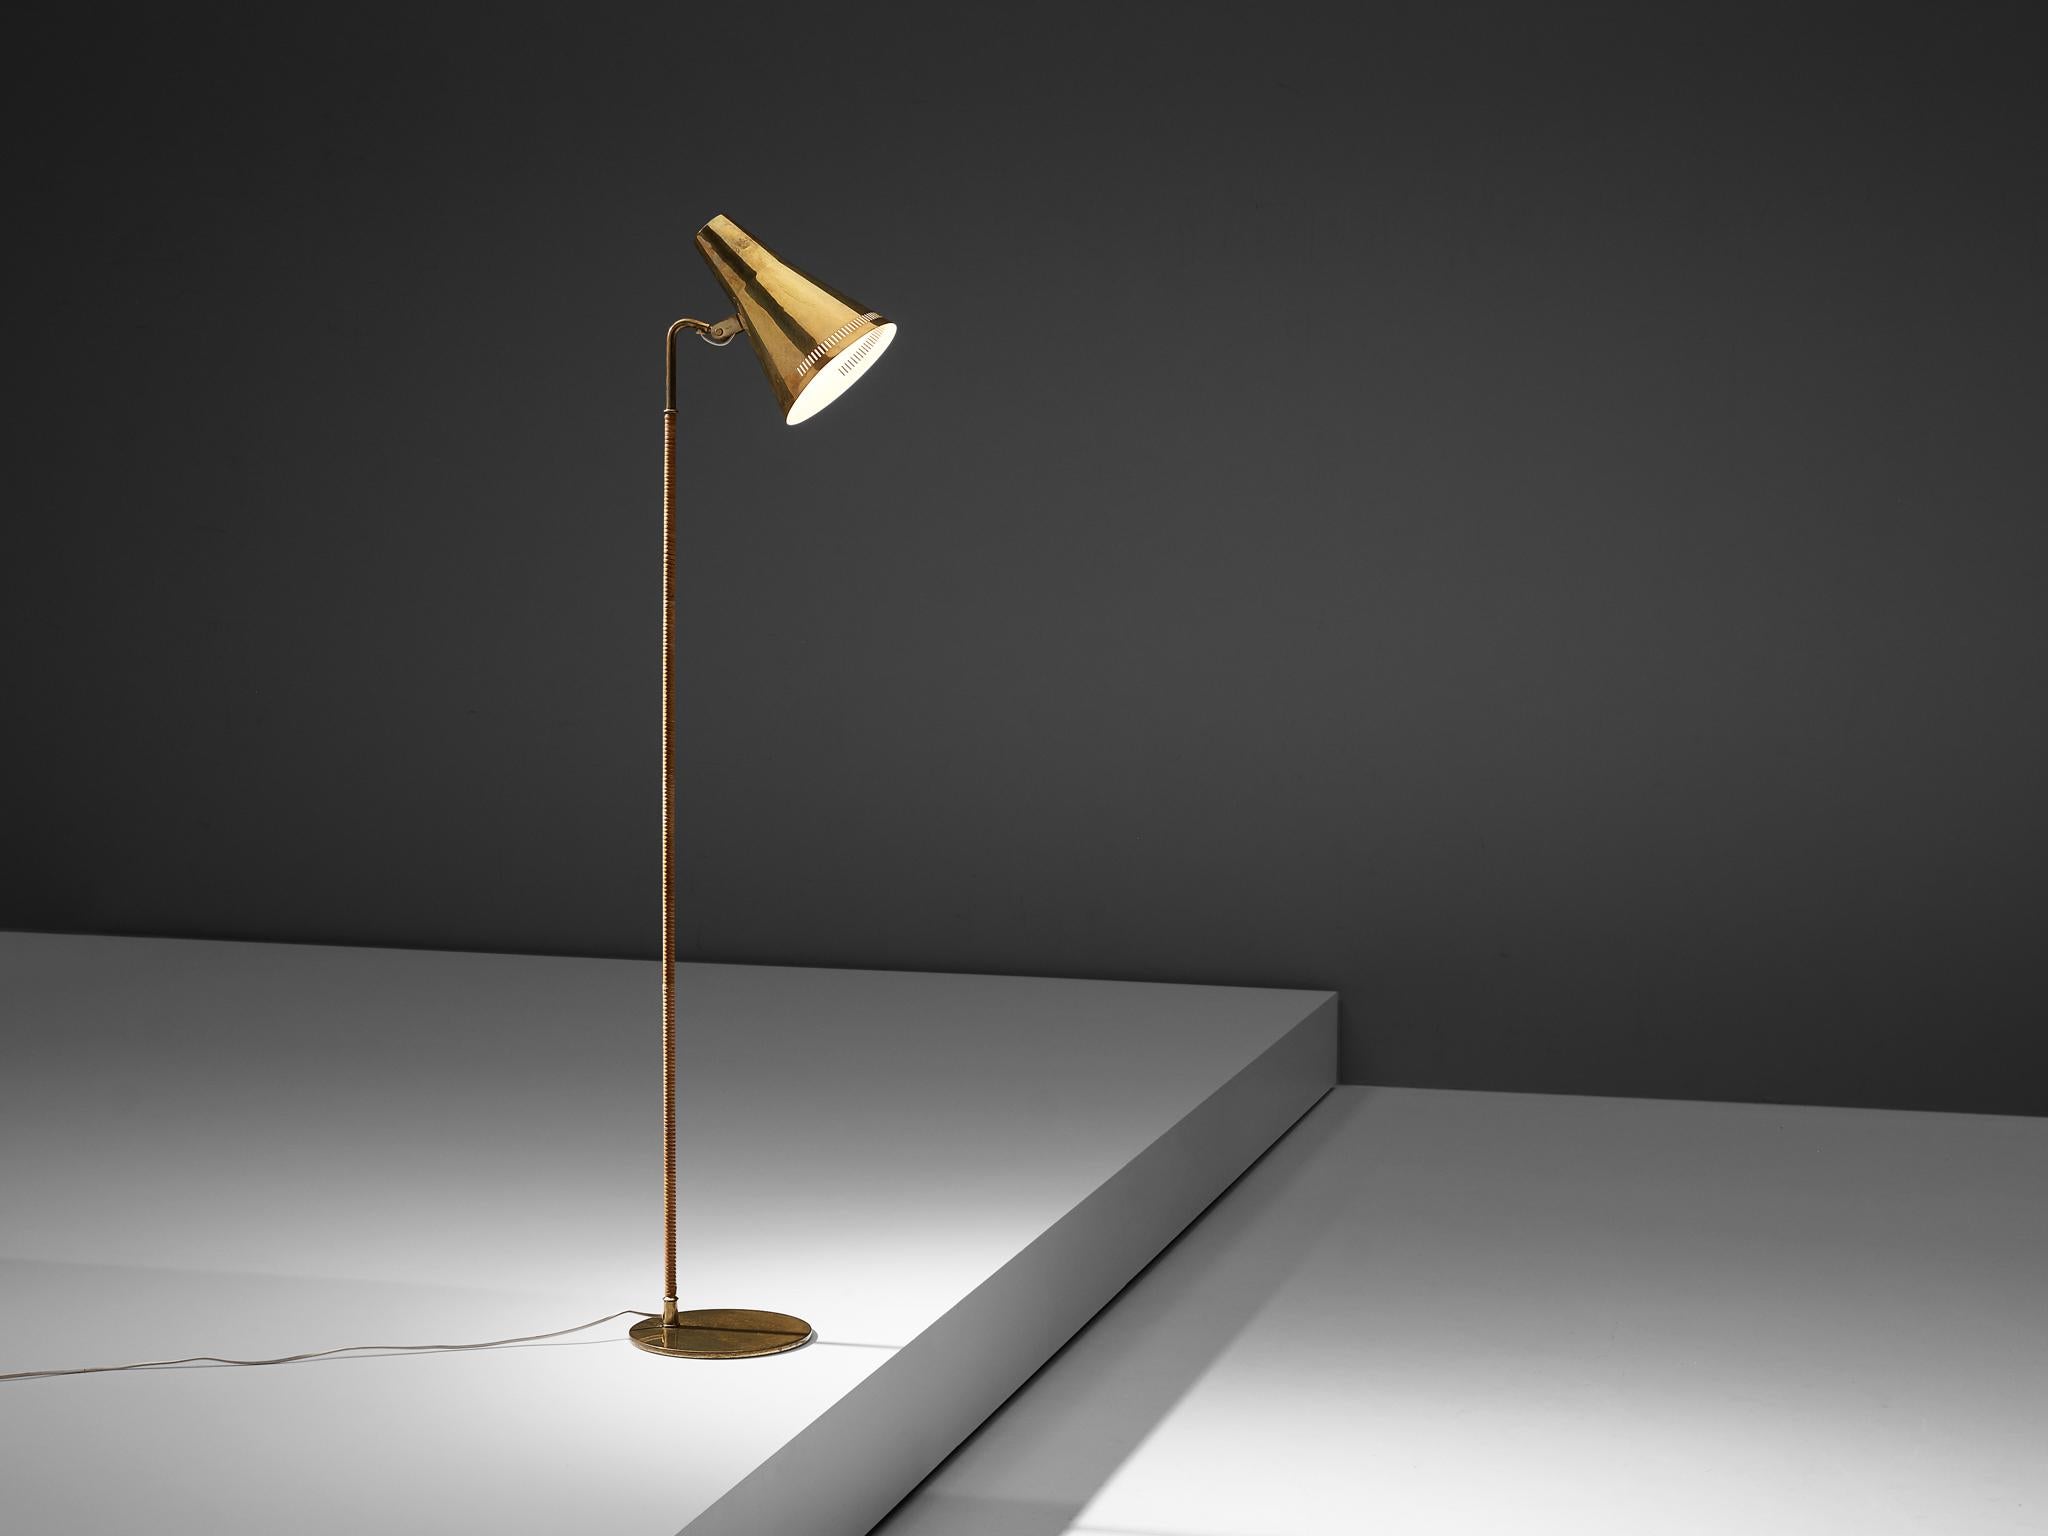 Paavo Tynell for Taito, model K10, floorlamp, lacquered metal, brass, cane, Finland, 1950s

Outstanding floor lamp, designed by Paavo Tynell, the Finnish design master of lighting. This delicate floor lamp has a few distinct features. The conical